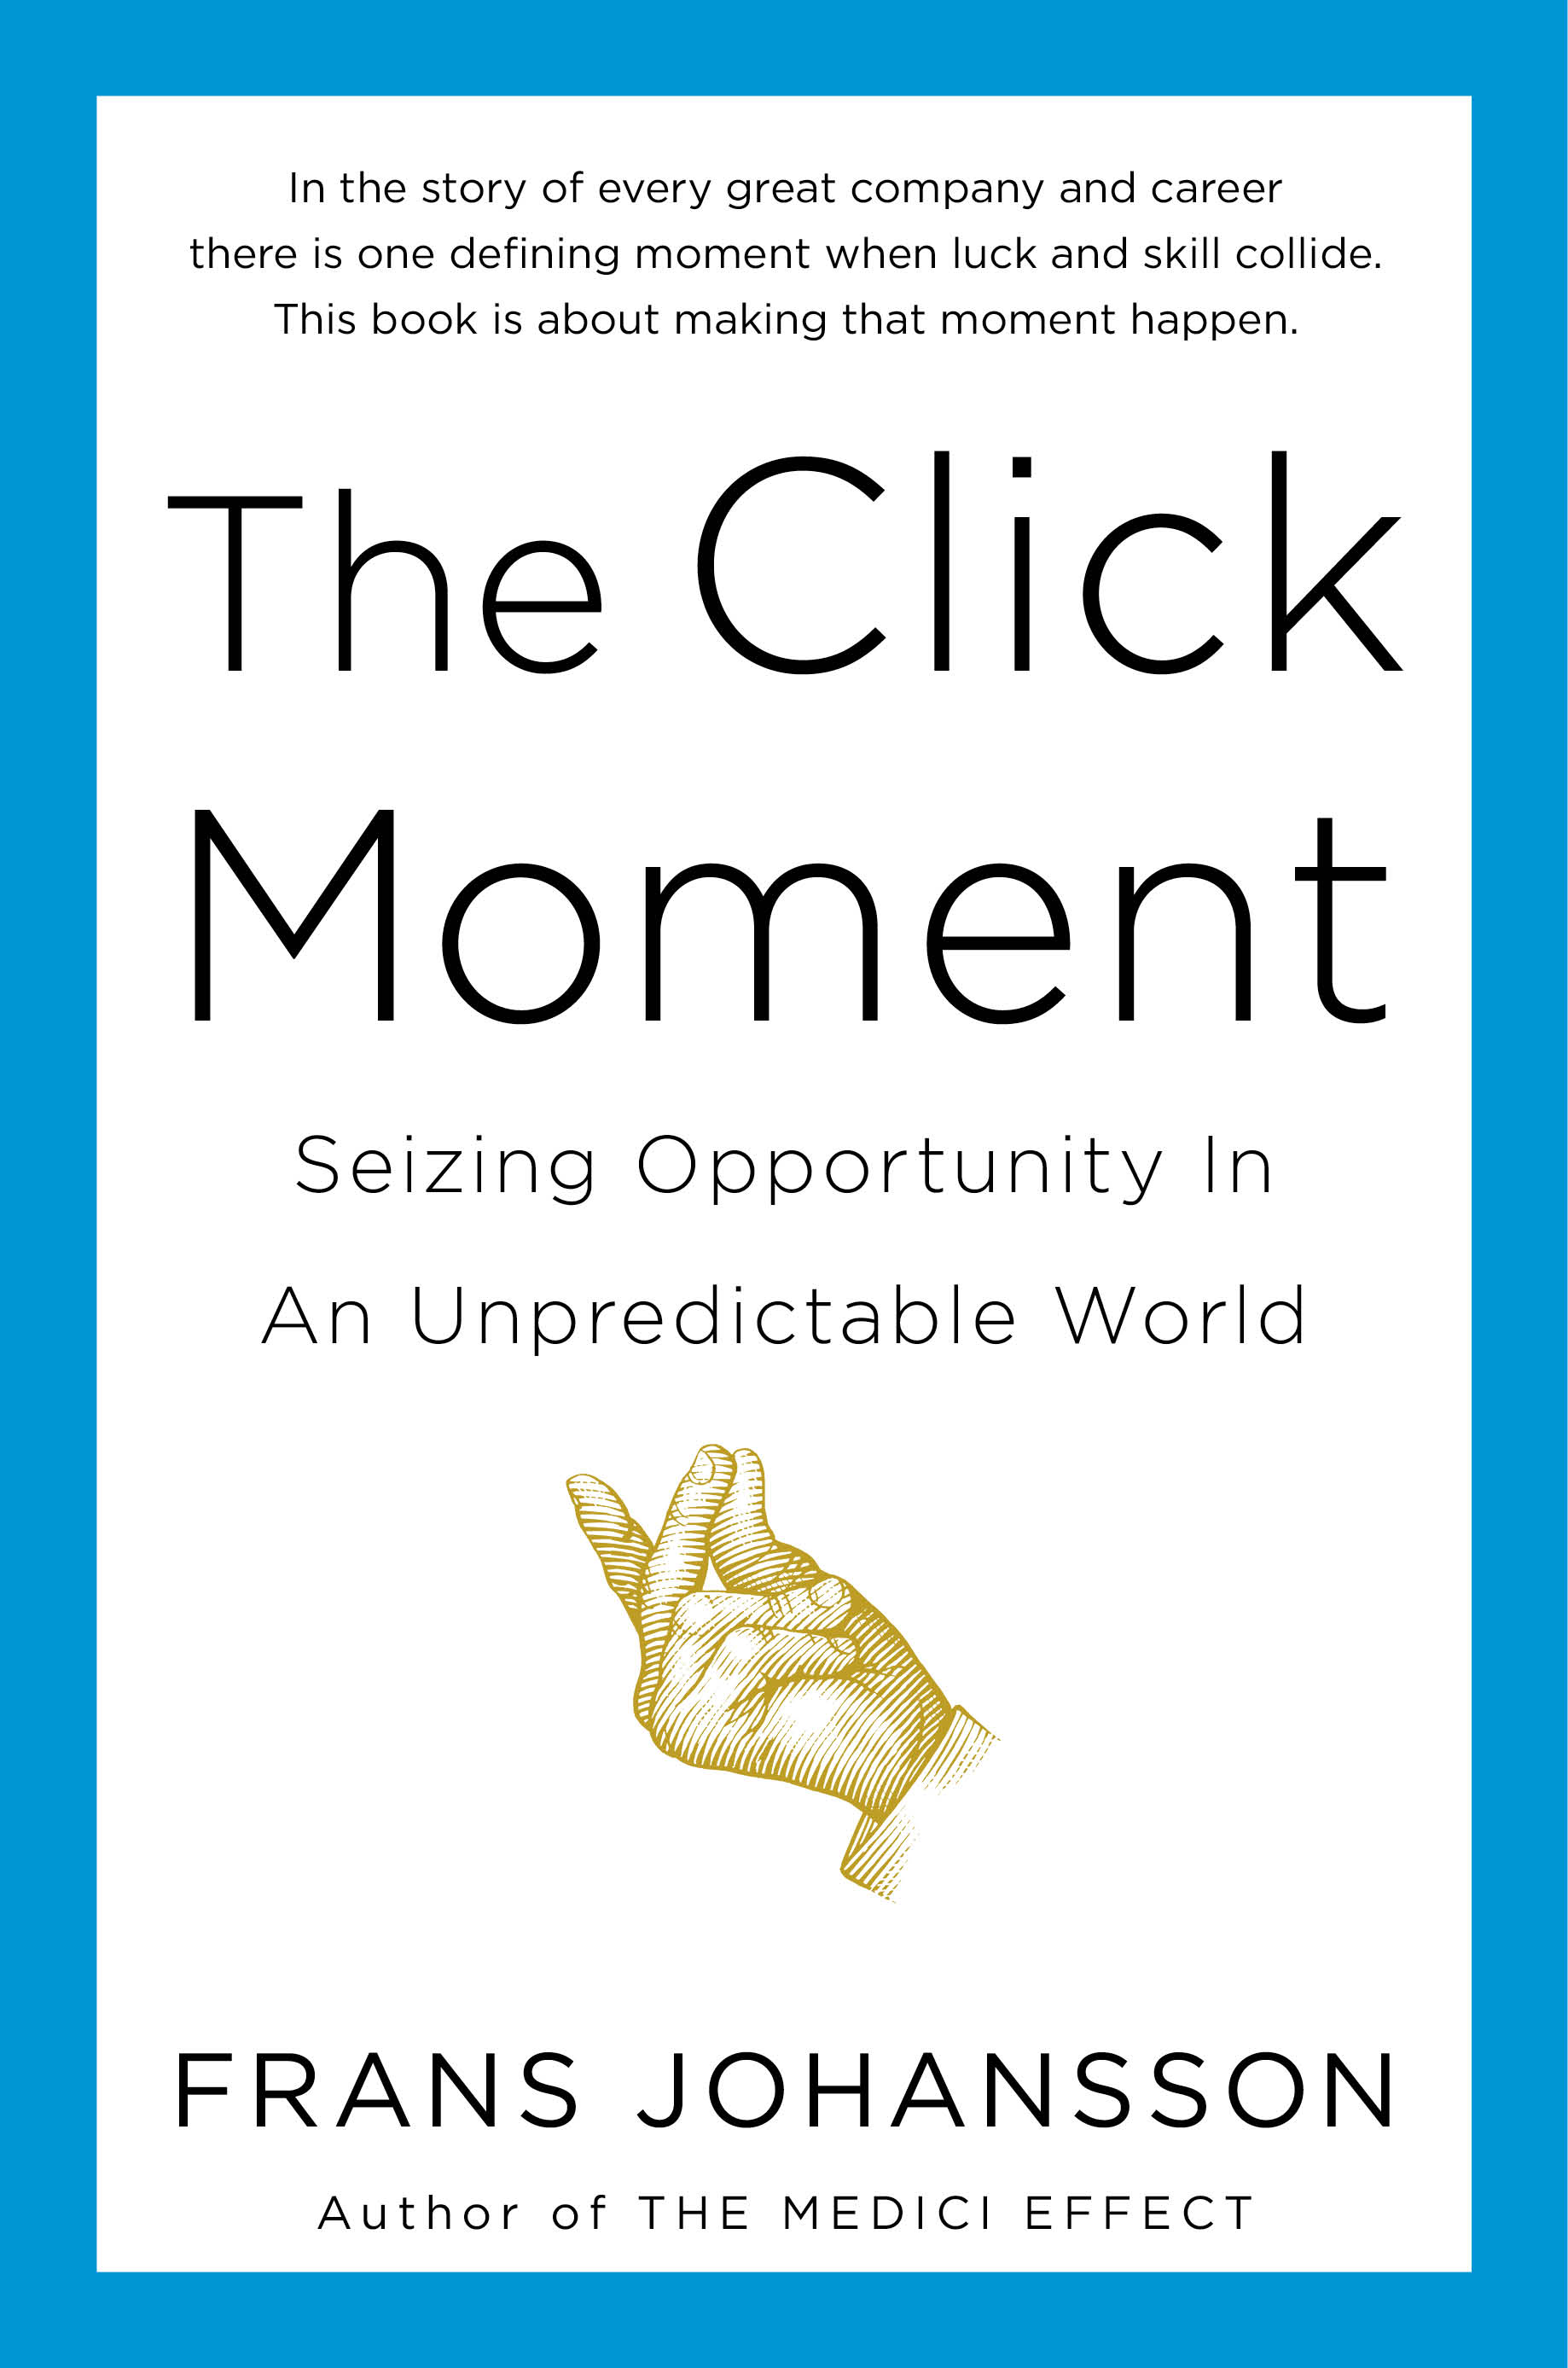 book 1448 219 The Click Moment: Seizing Opportunity in an Unpredictable World